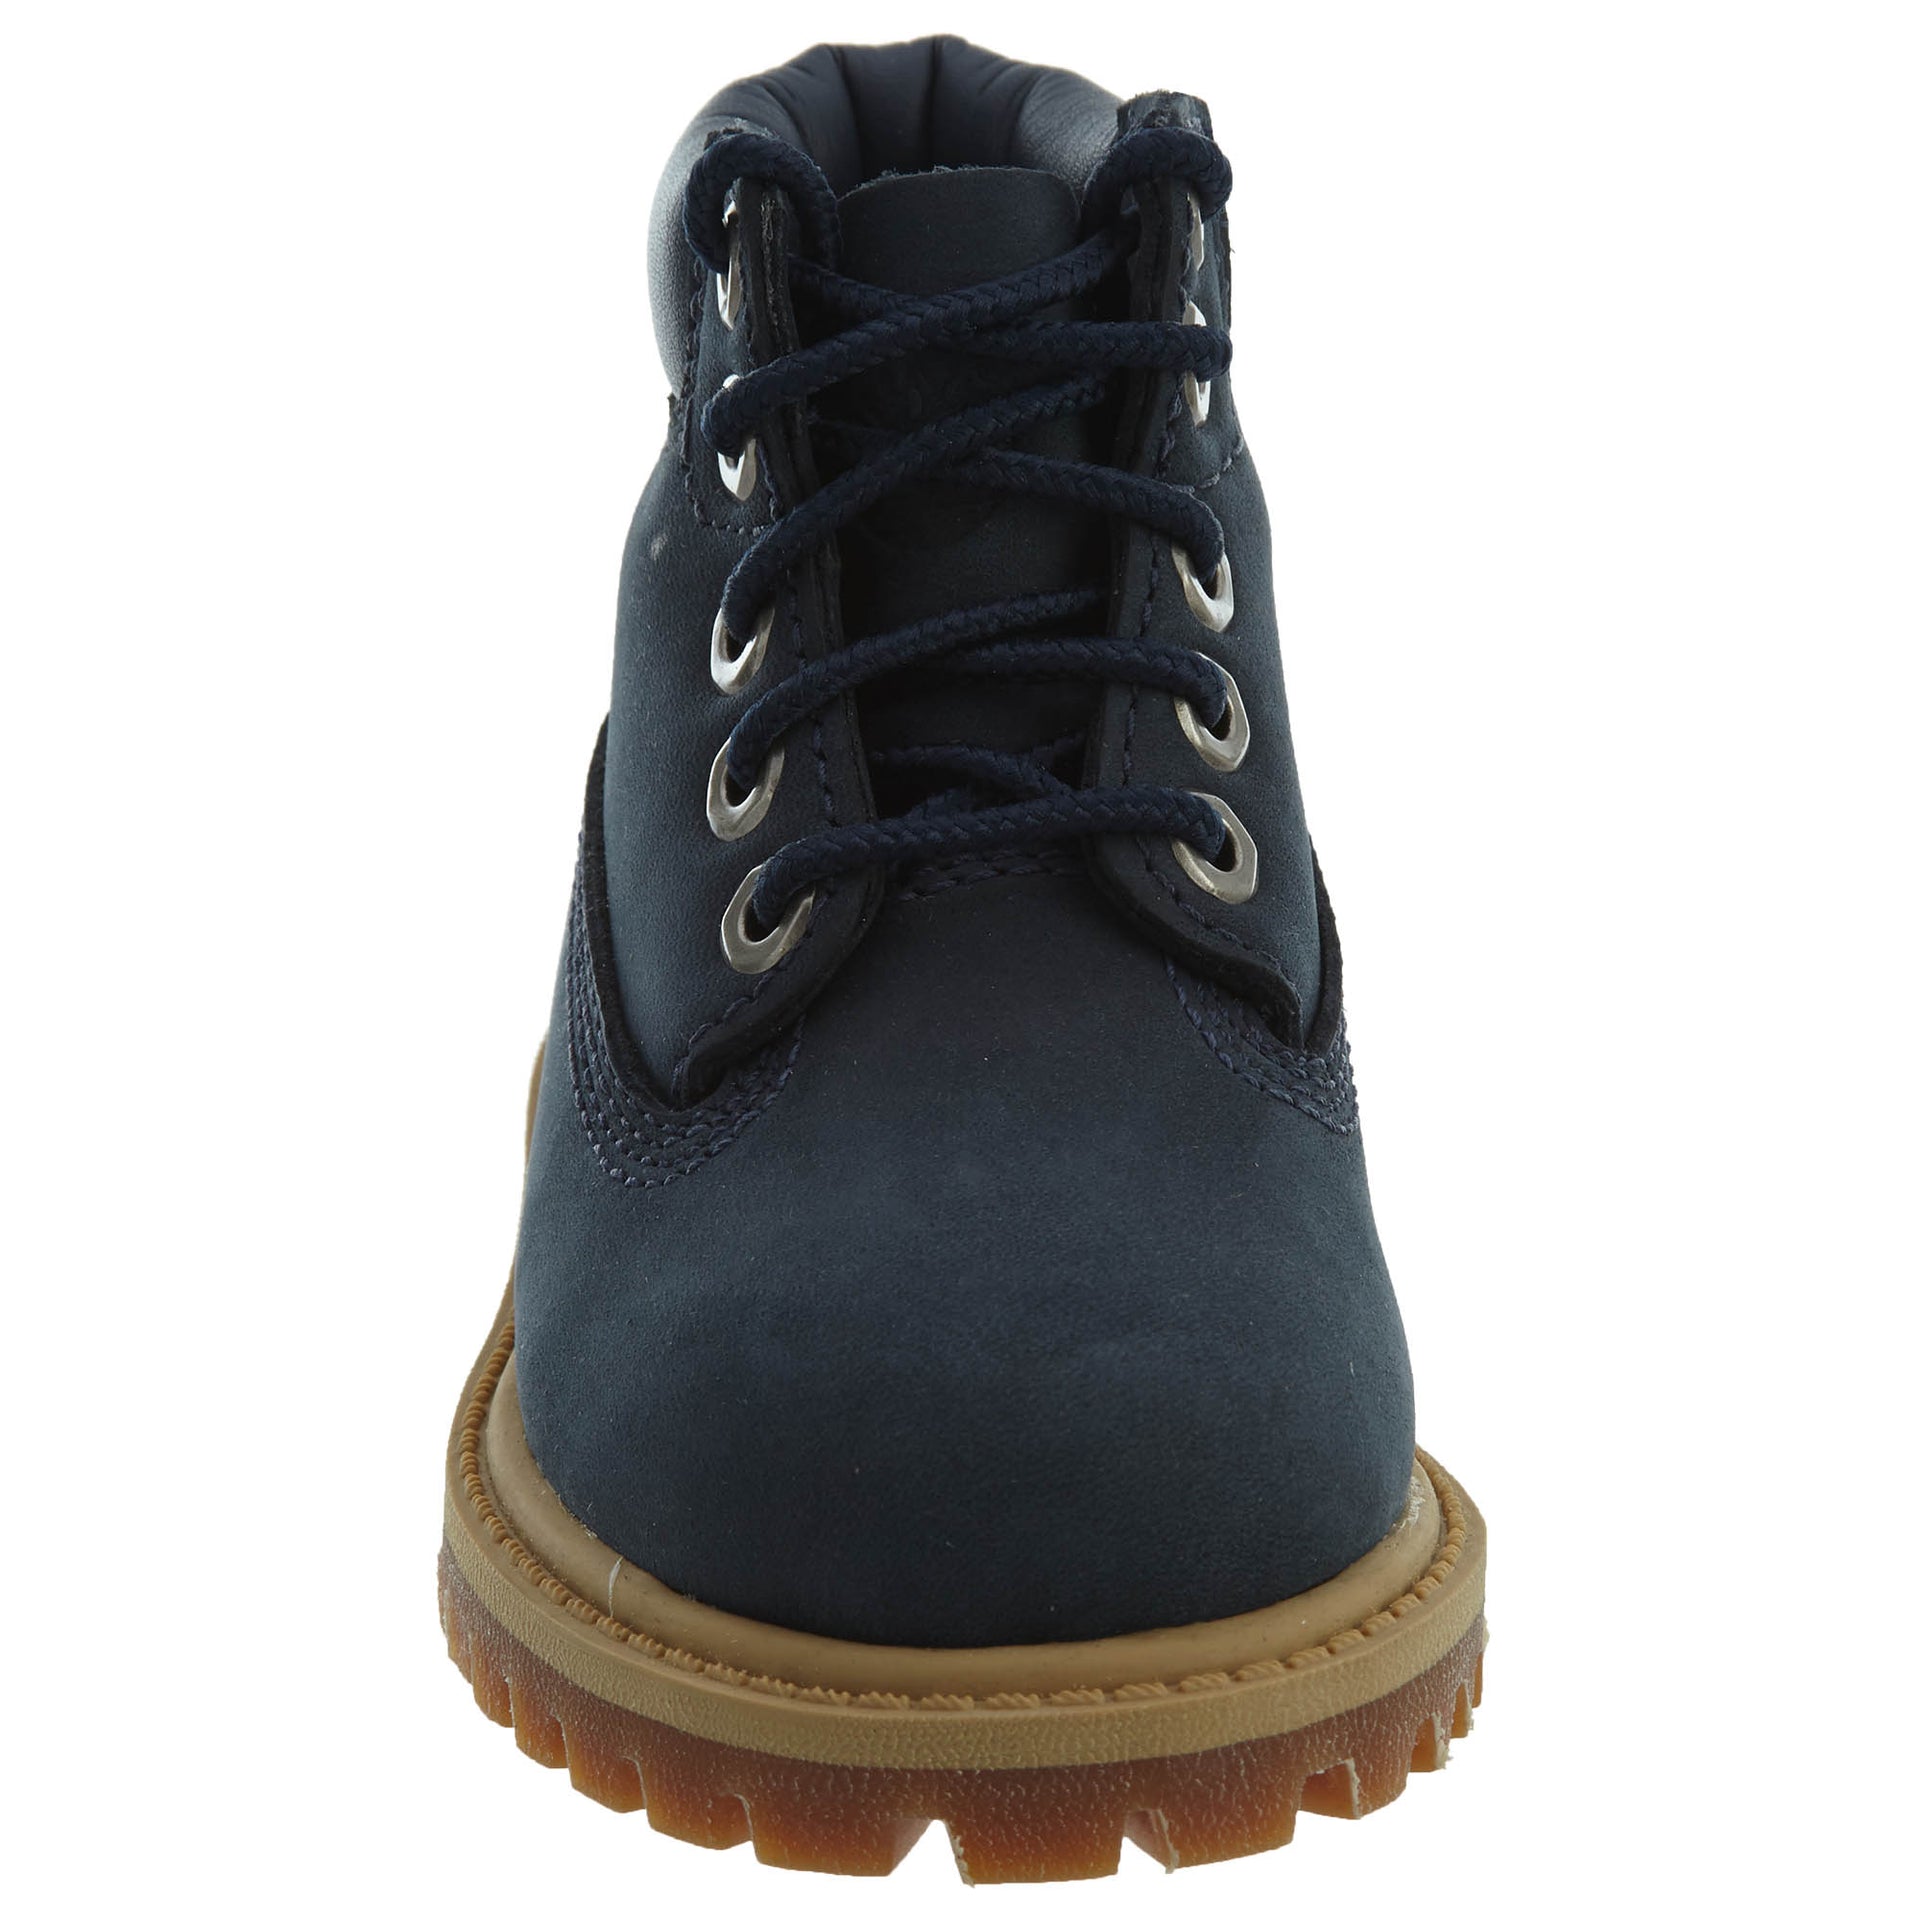 Timberland 6" Premium Boot   Toddlers Style : Tb09487r